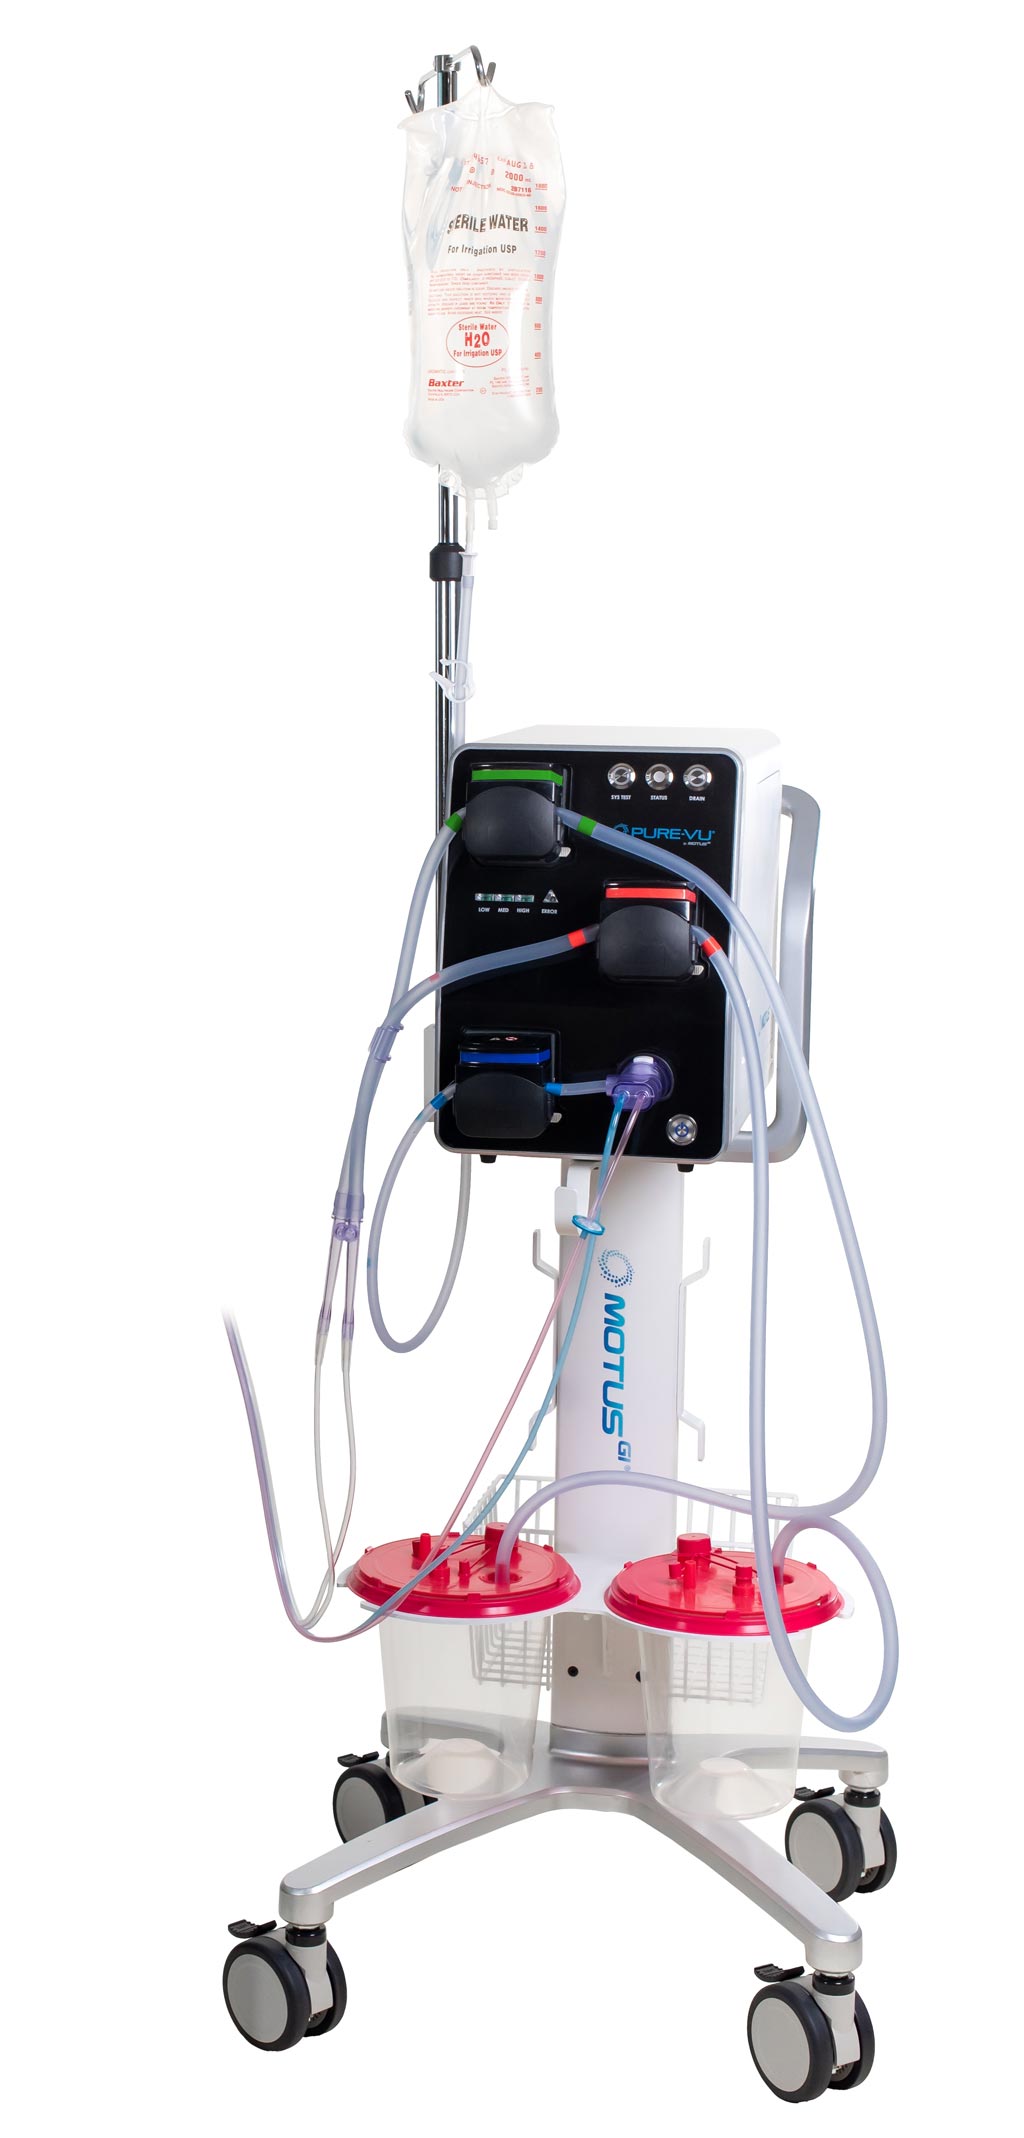 Image: The Pure-Vu GEN2 colon cleansing system (Photo courtesy of Motus GI).